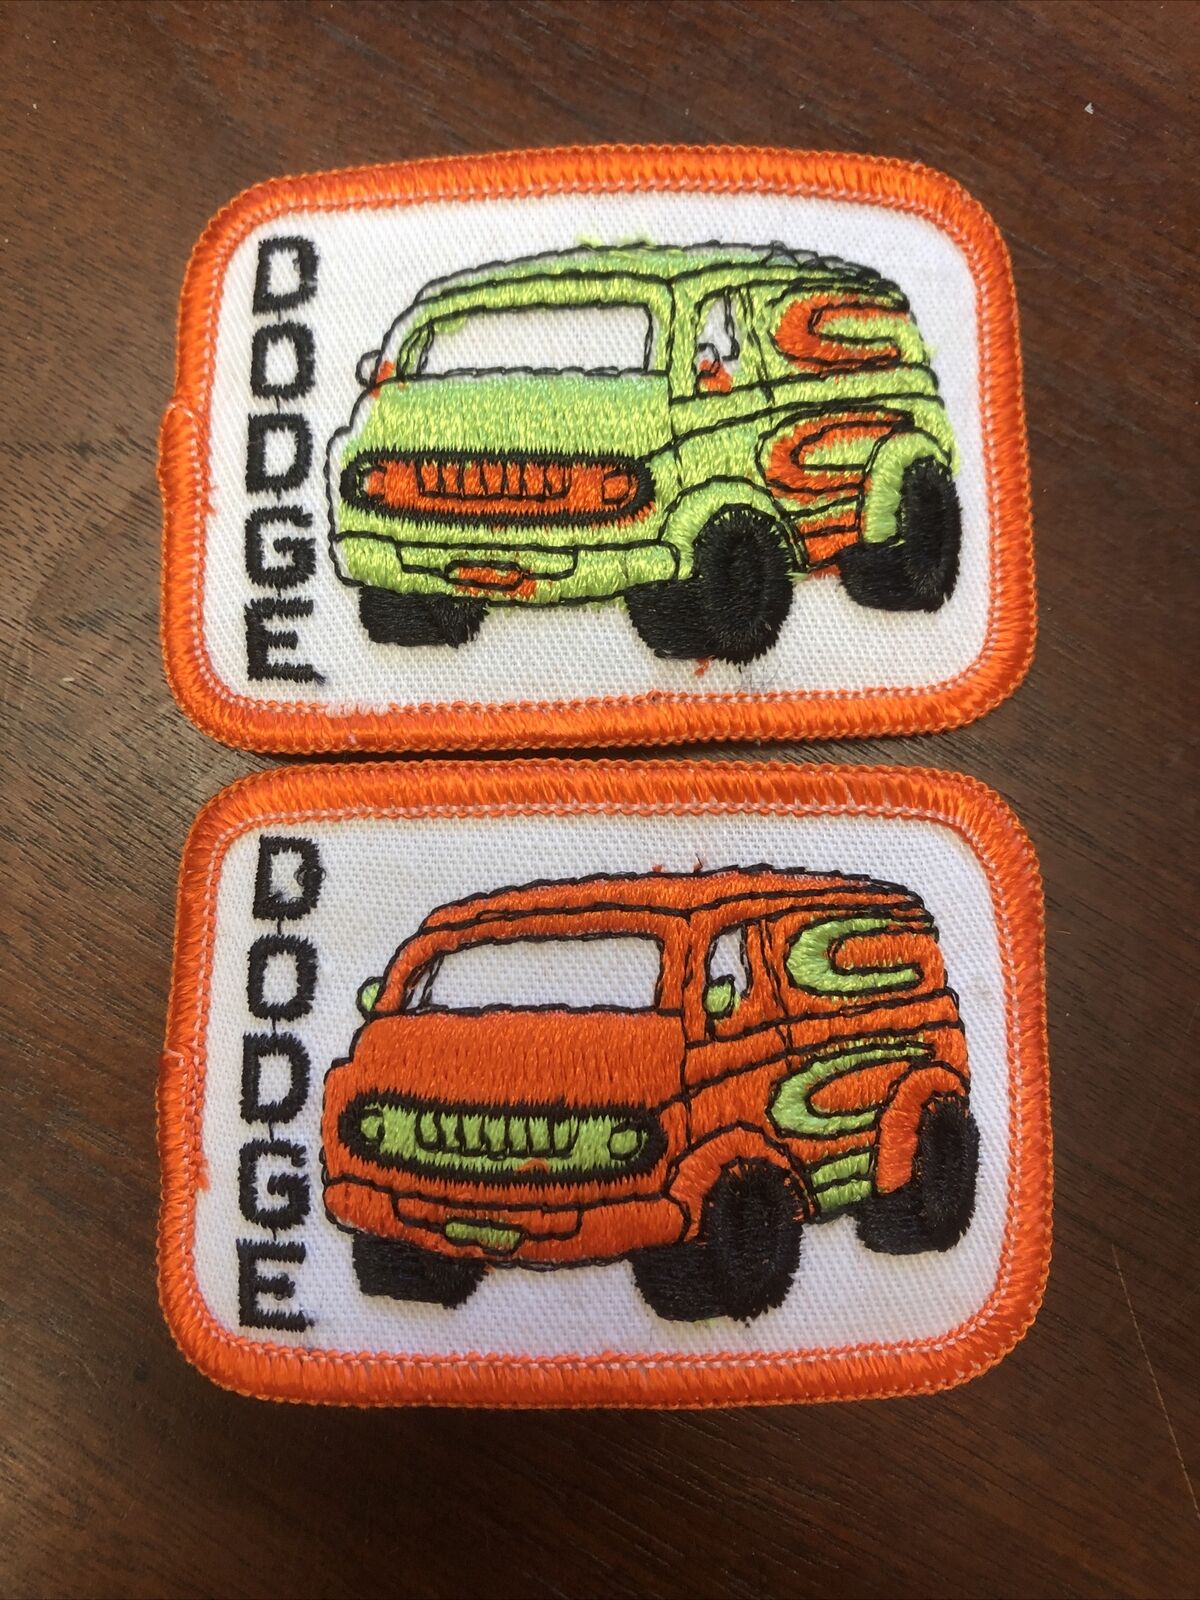 Pick 1 Or Buy Both VINTAGE DODGE VAN Iron or Sew-On Patch 25 Years Old 3”x2”